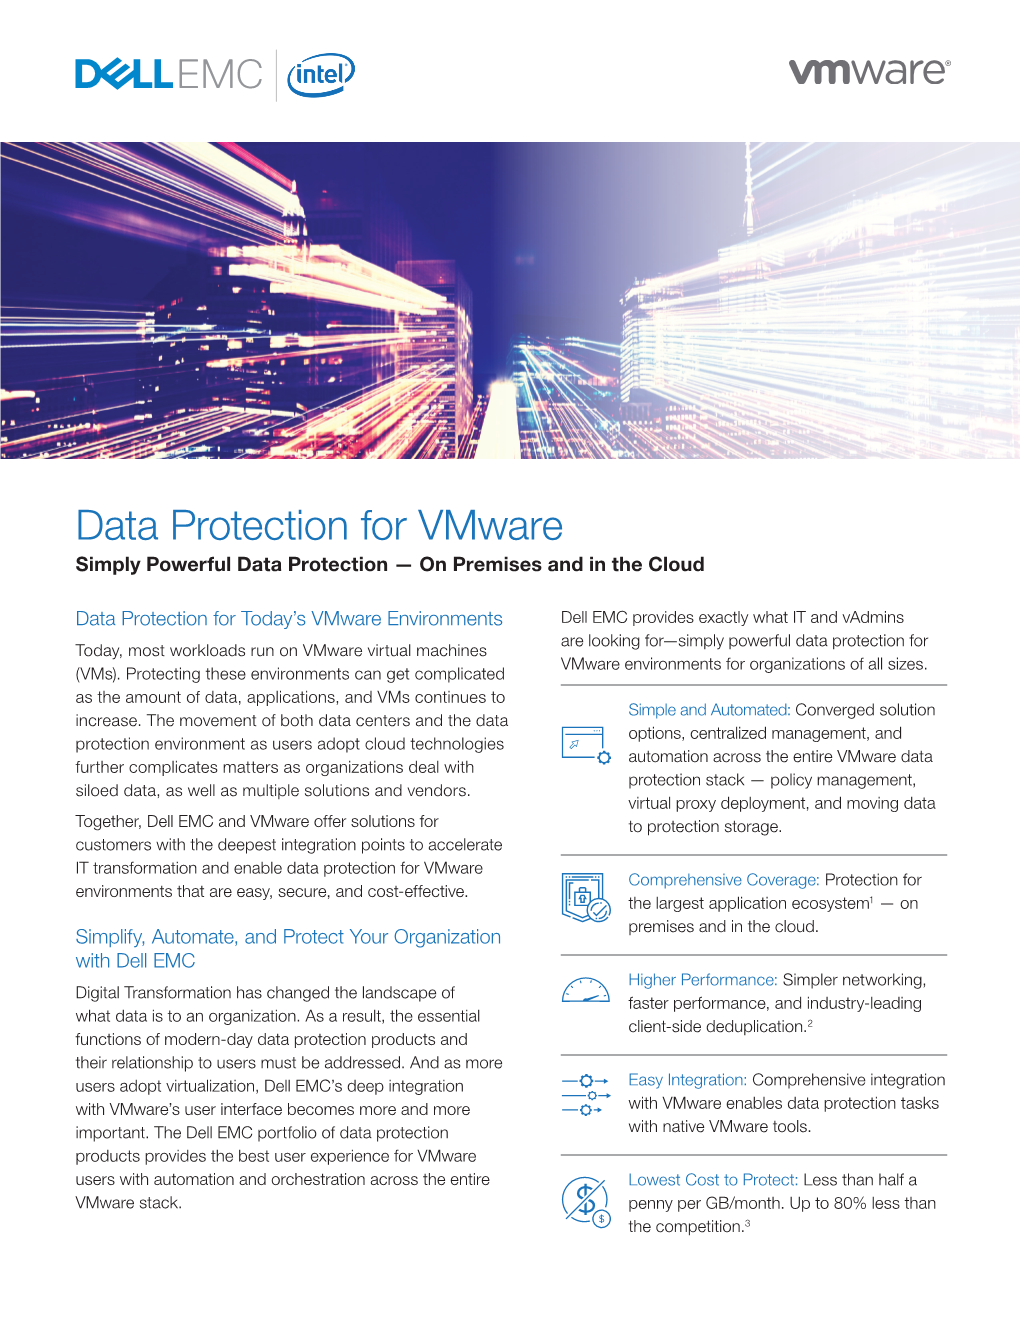 Data Protection for Vmware Simply Powerful Data Protection — on Premises and in the Cloud